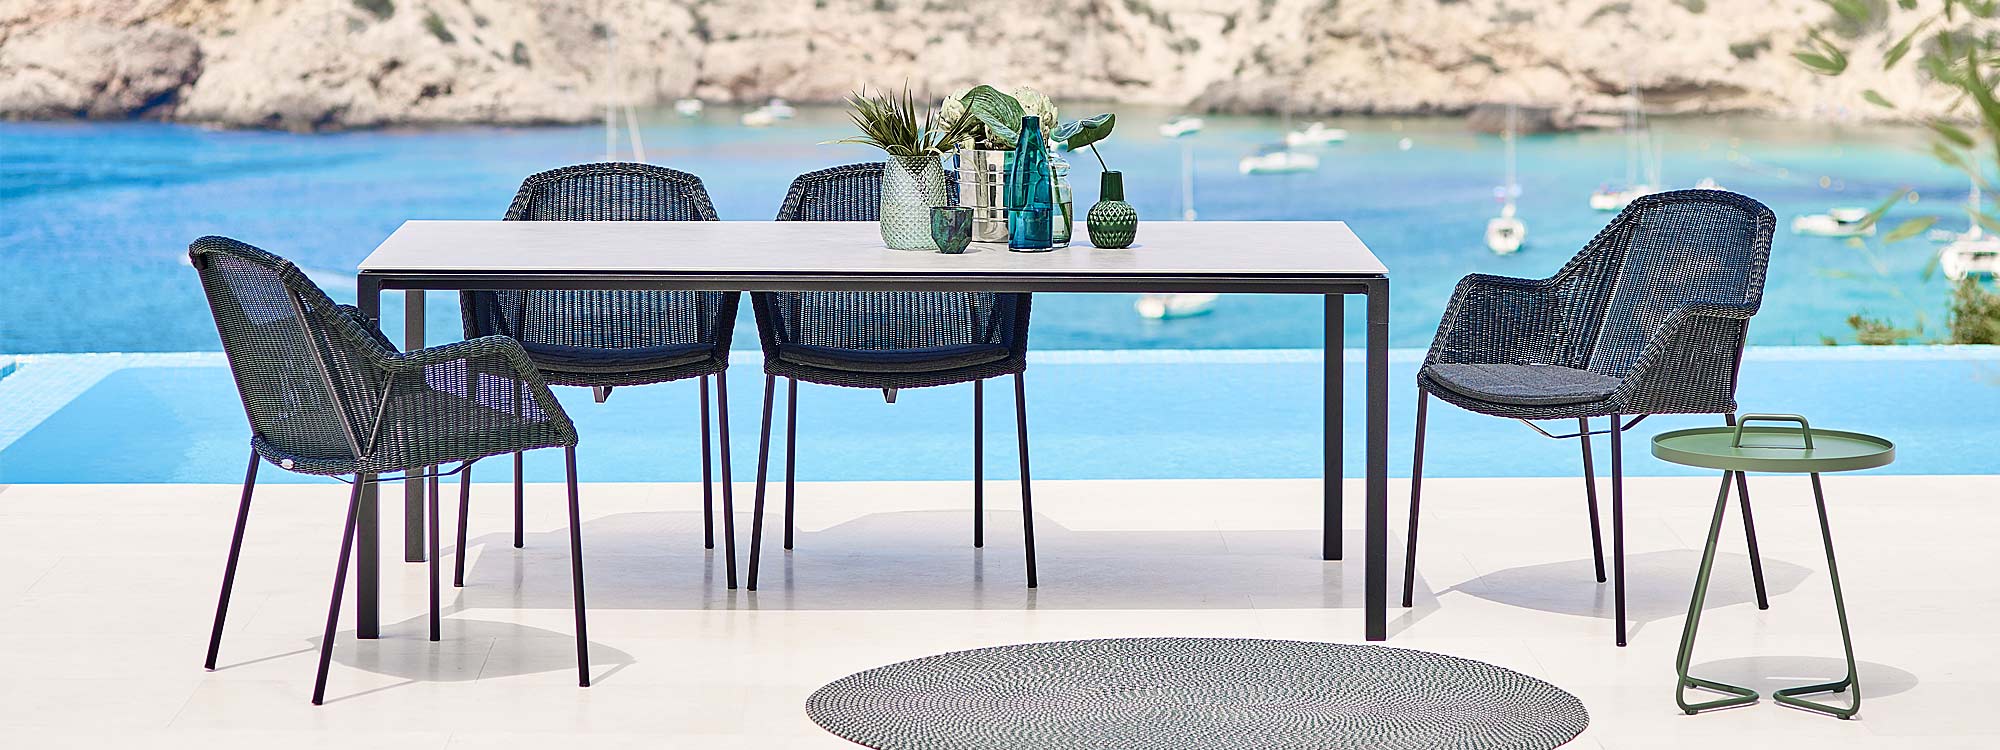 Image of black Breeze chairs and Pure garden dining table by Caneline, with bay and yachts in the background